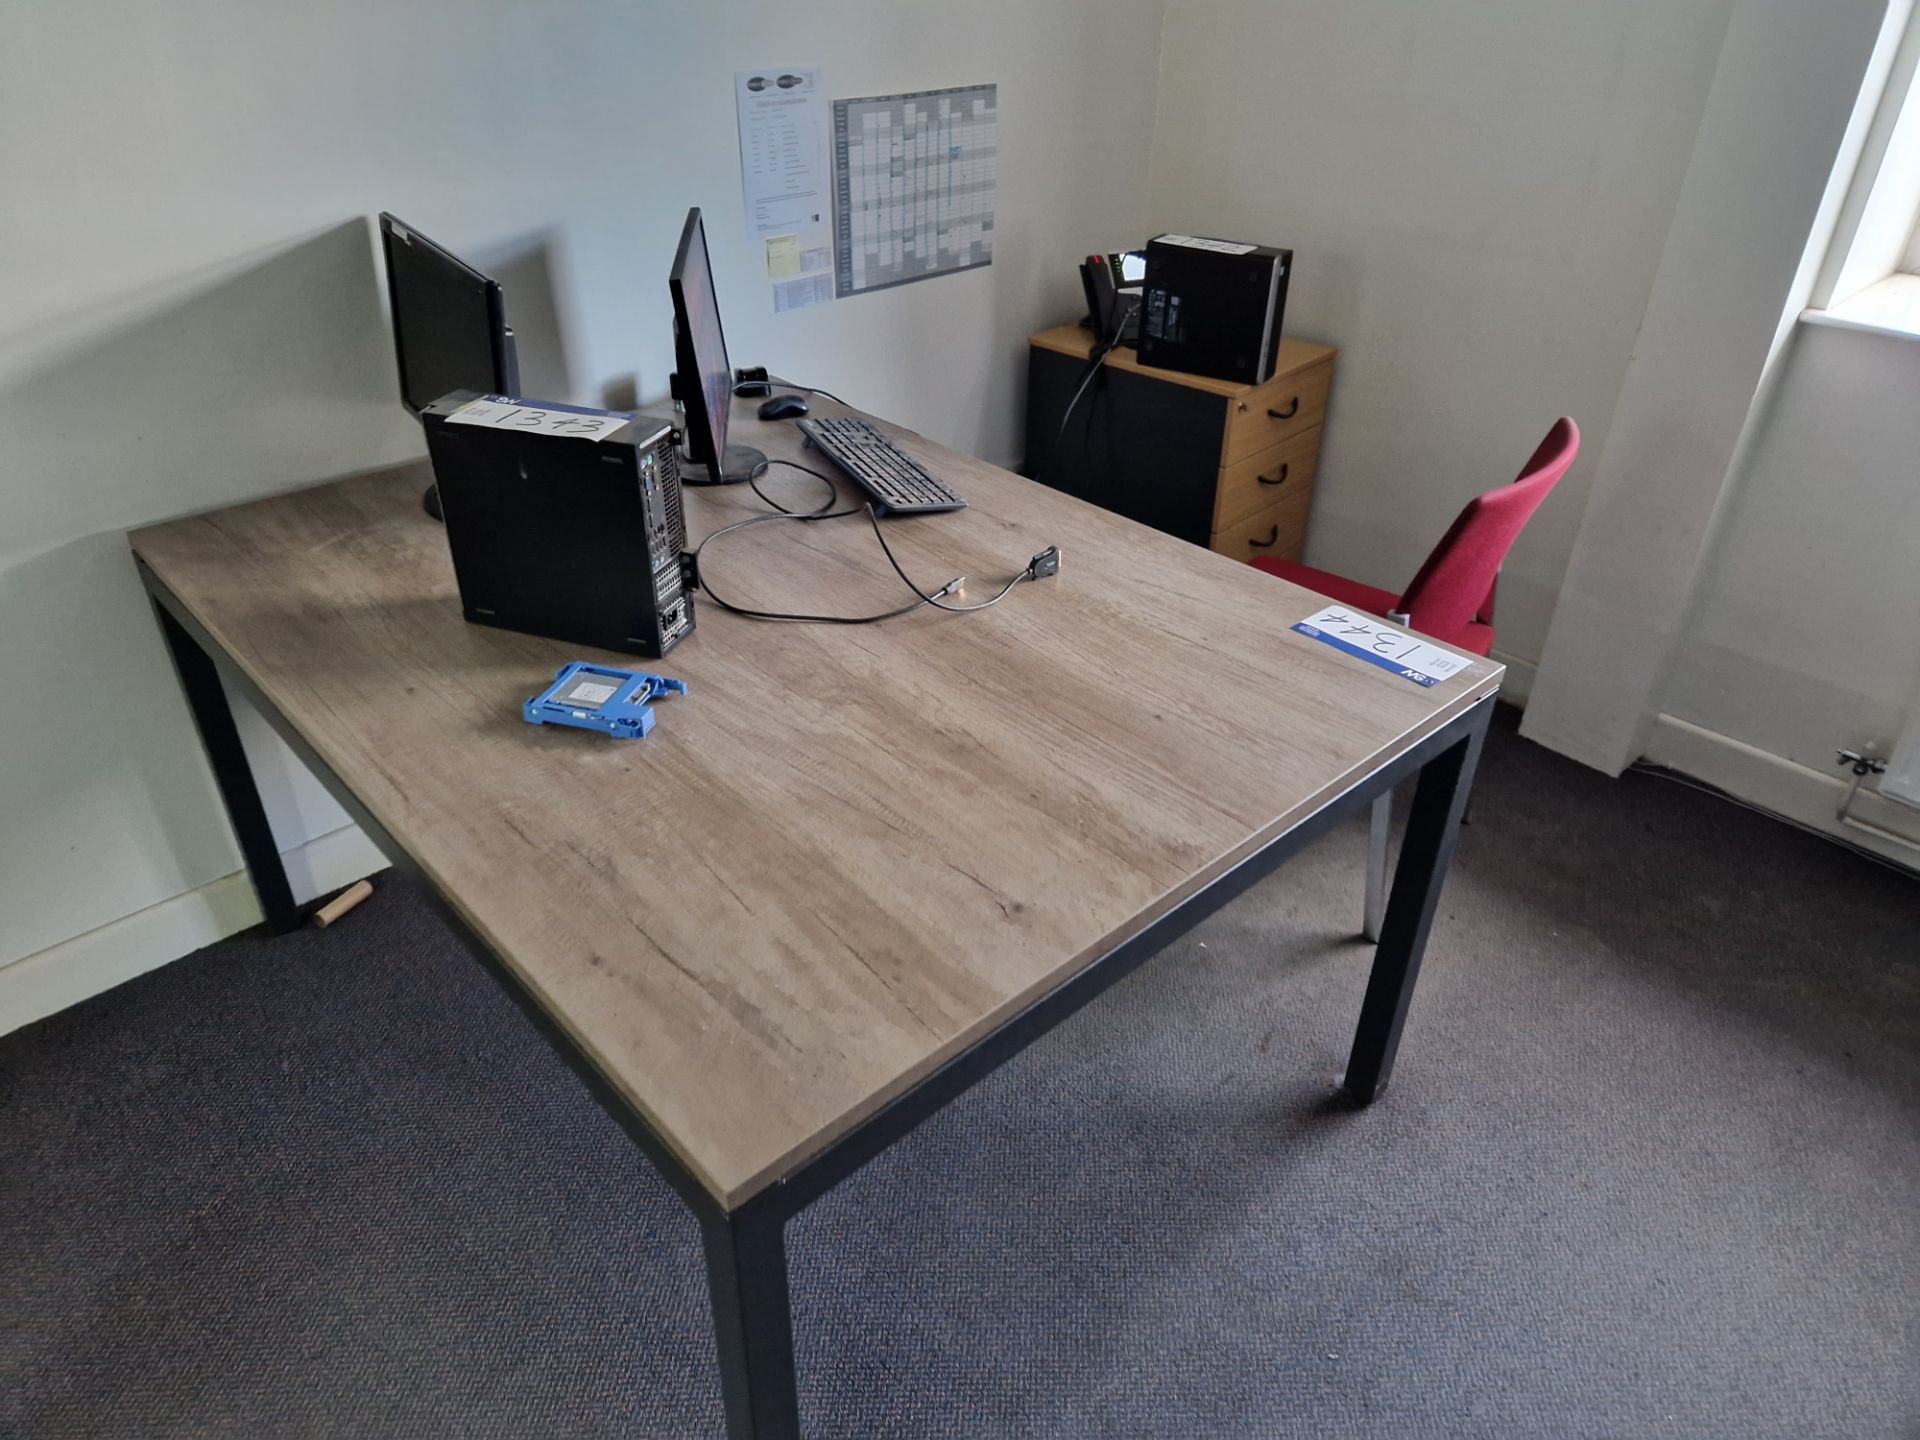 Large Grey Oak Veneered Table, 3 Drawer Pedestal and Office Chair Please read the following